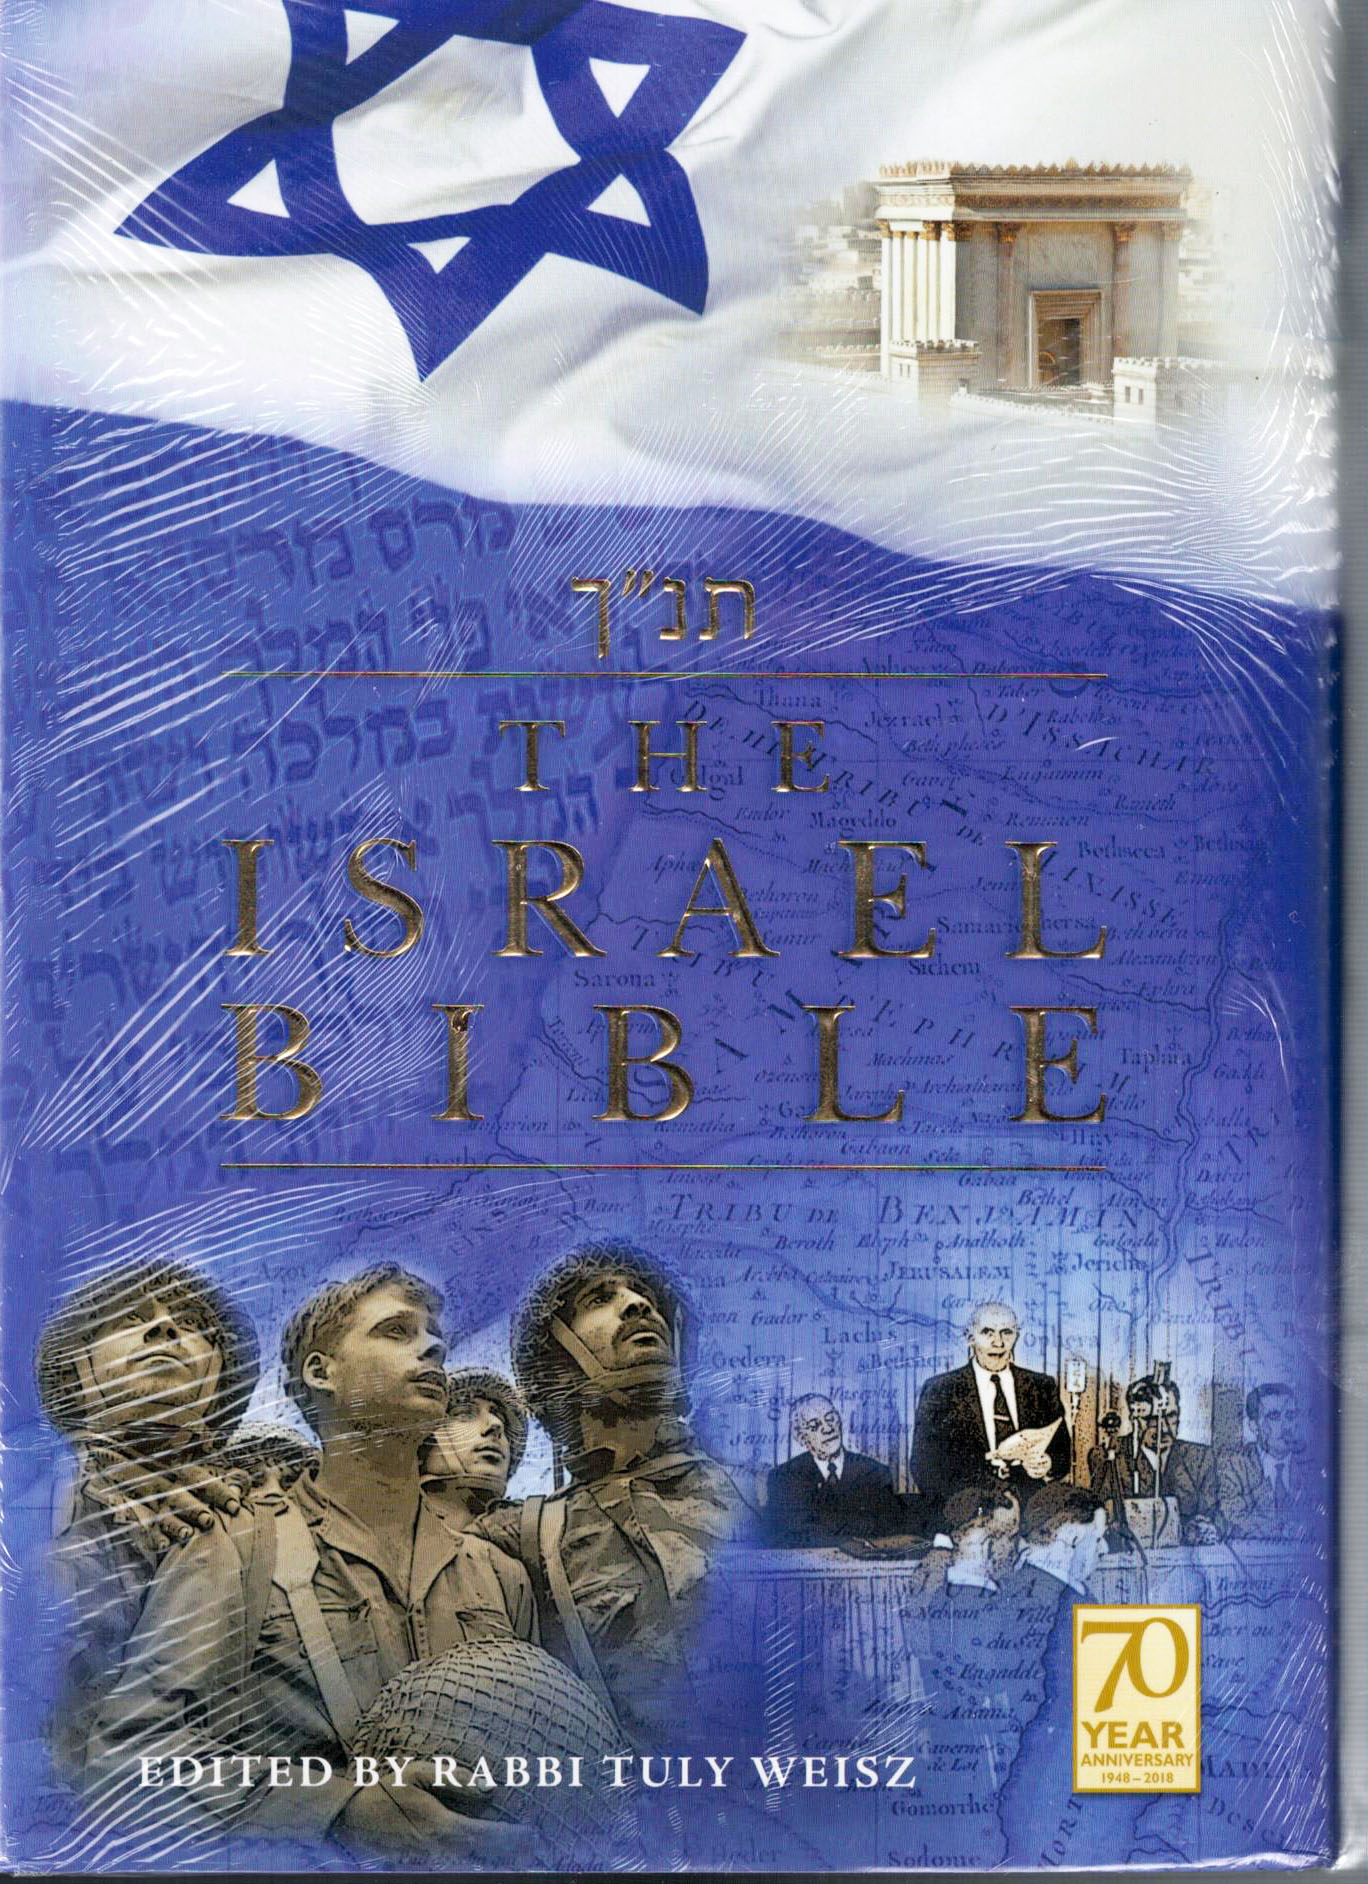 Recently published 'The Israel Bible' tells in over 2,000